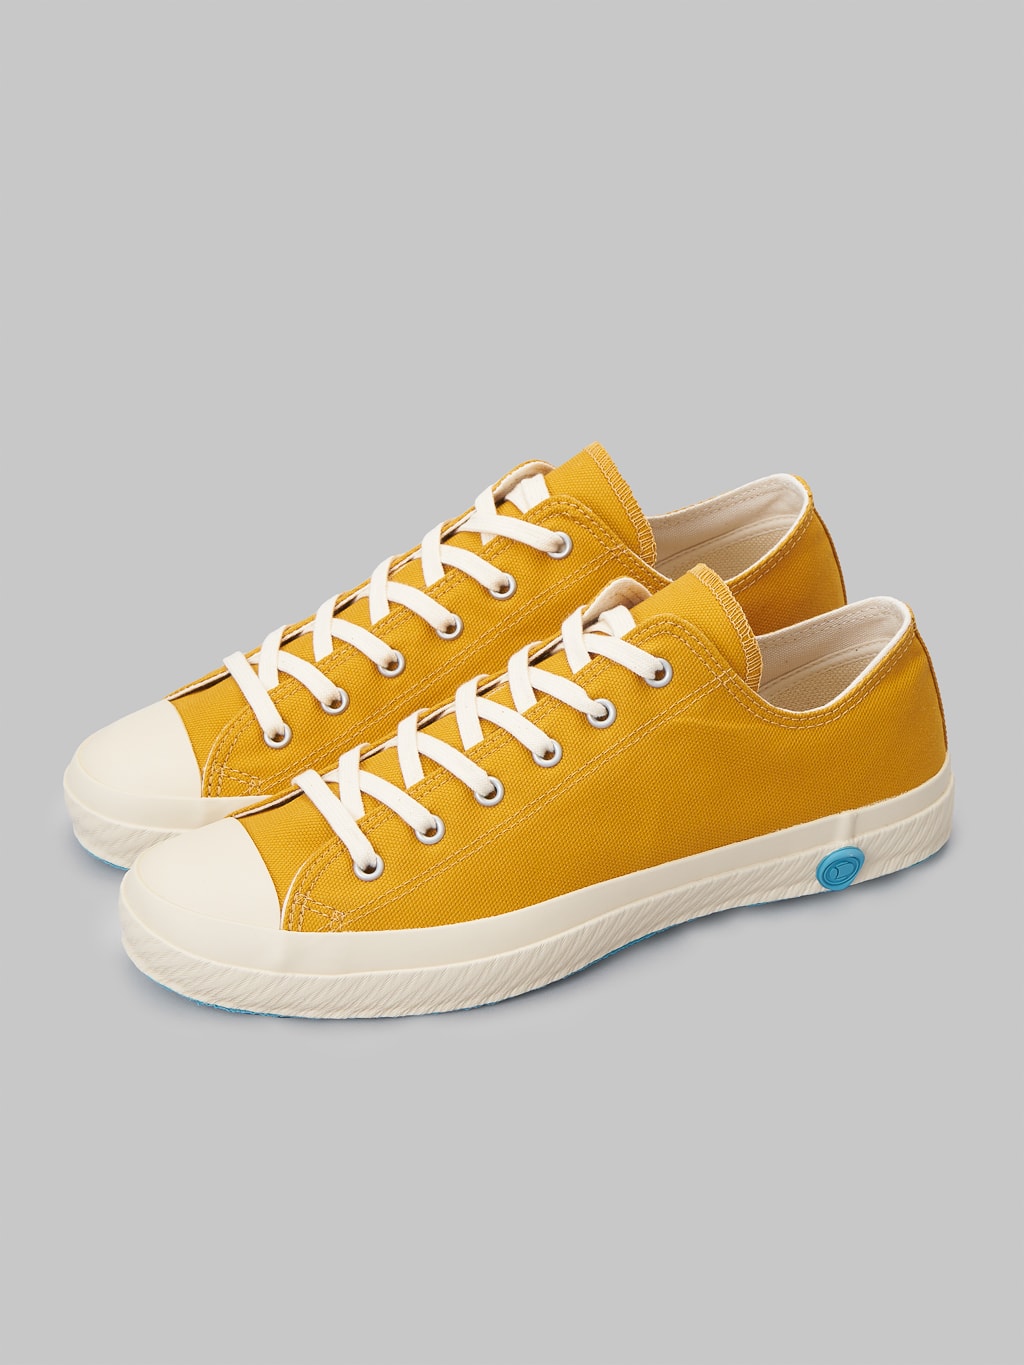 Shoes like pottery low mustard sneakers made in japan